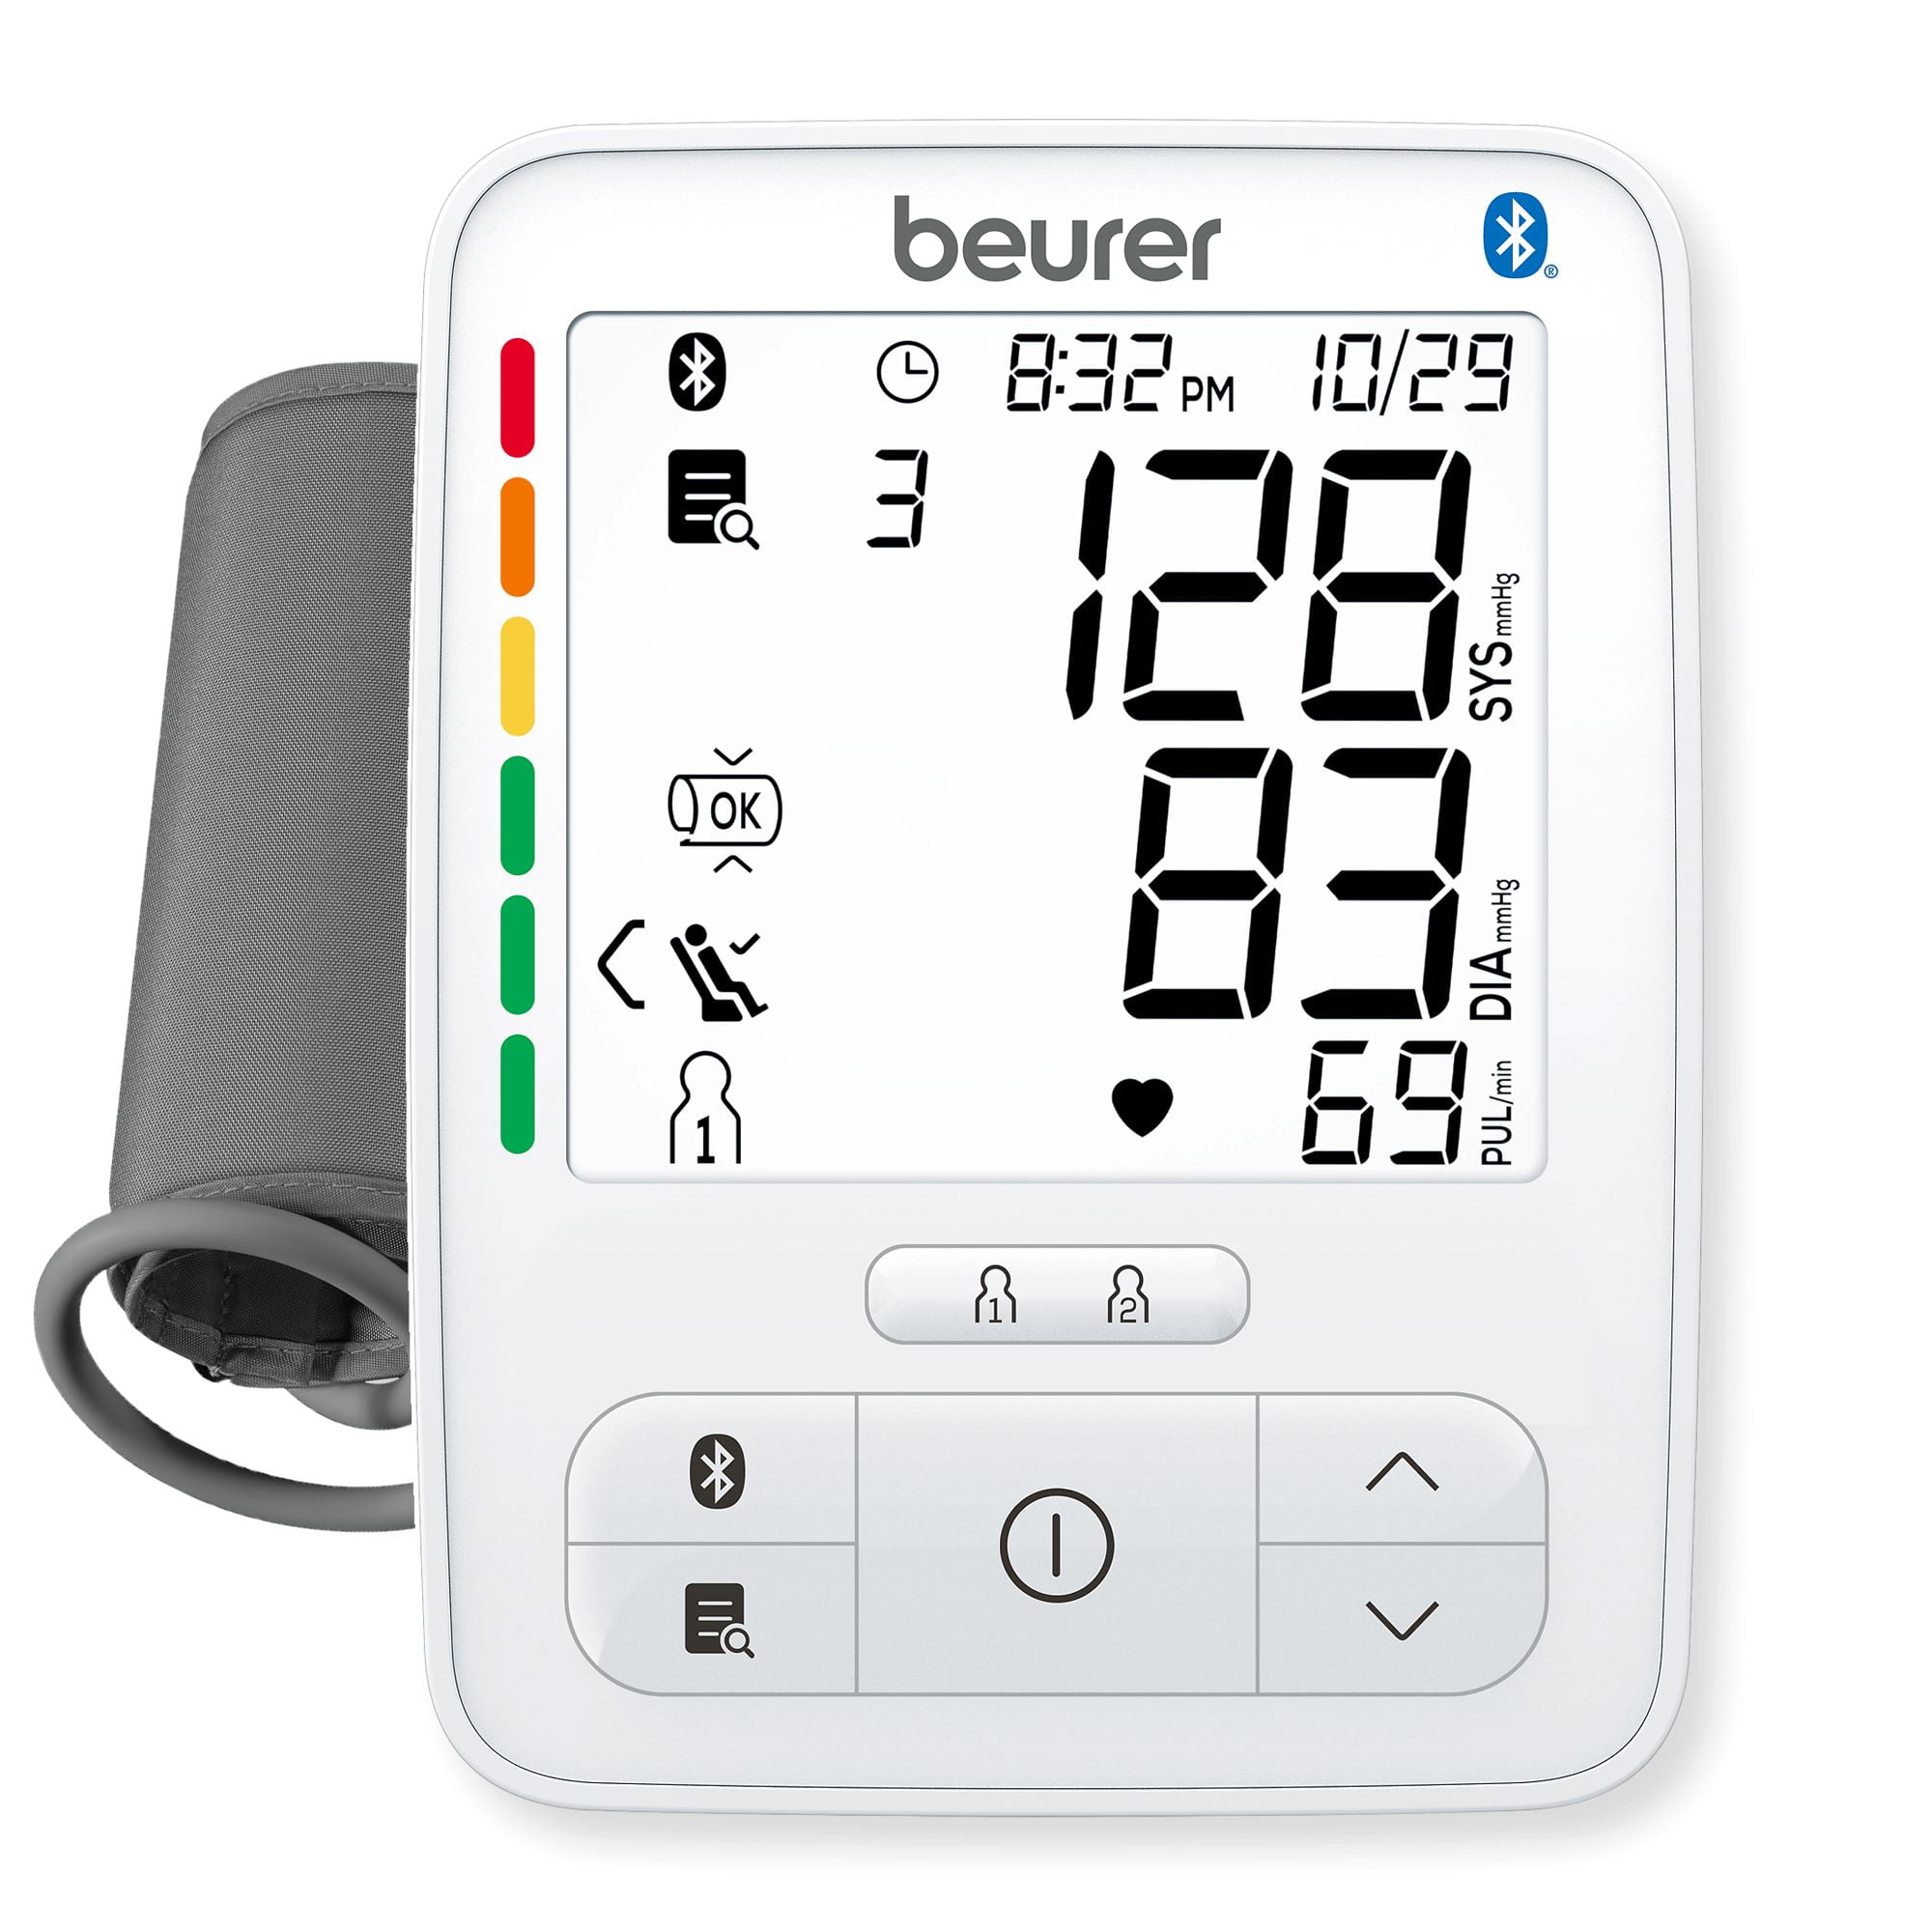 Electronic Wrist Blood Pressure Monitor – NuvoMed